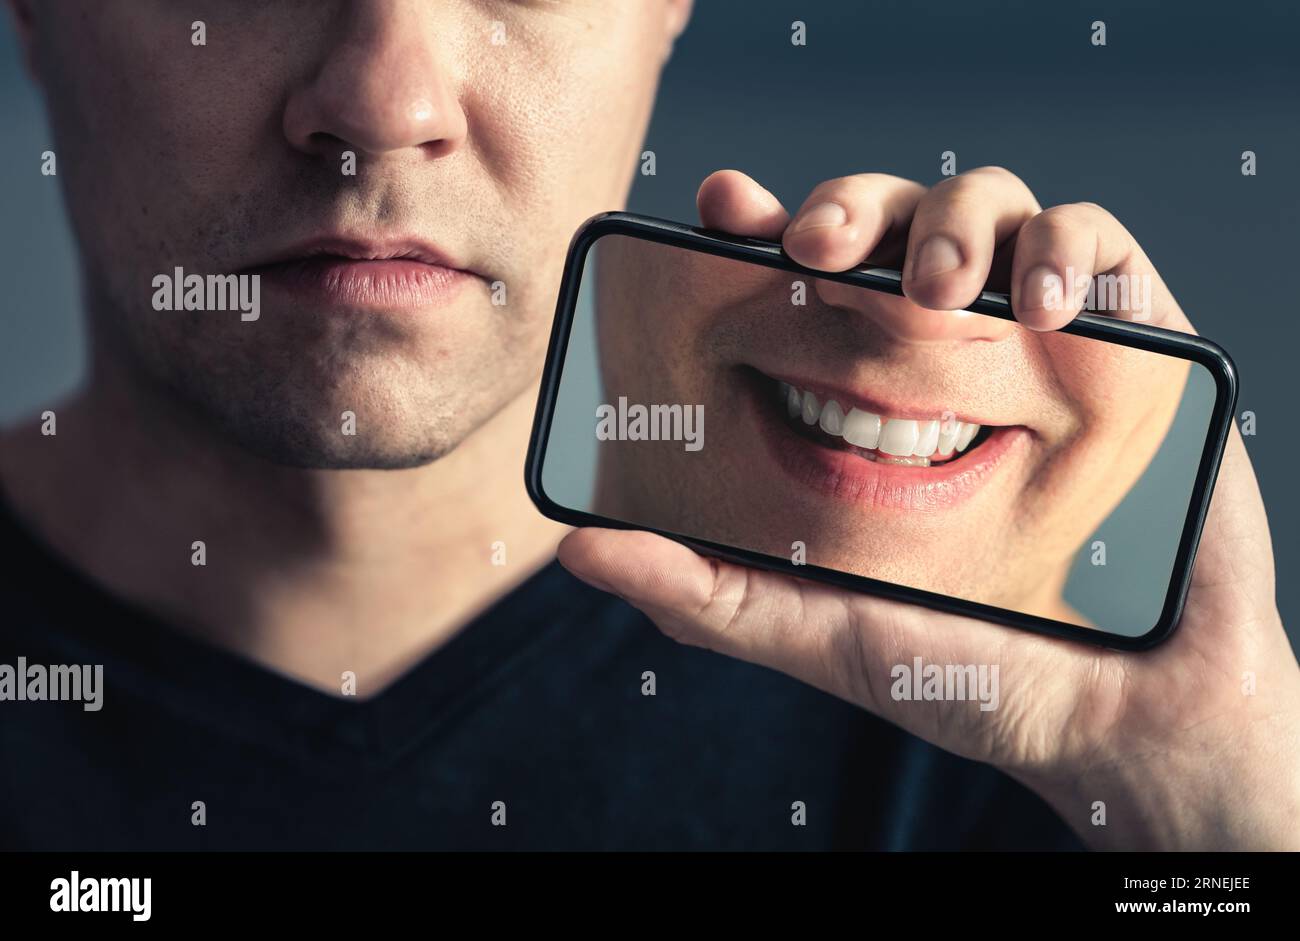 Fake social media smile or filter. Sad face and happy in phone screen. Mental health, depression online and technology concept. Man with anxiety. Stock Photo